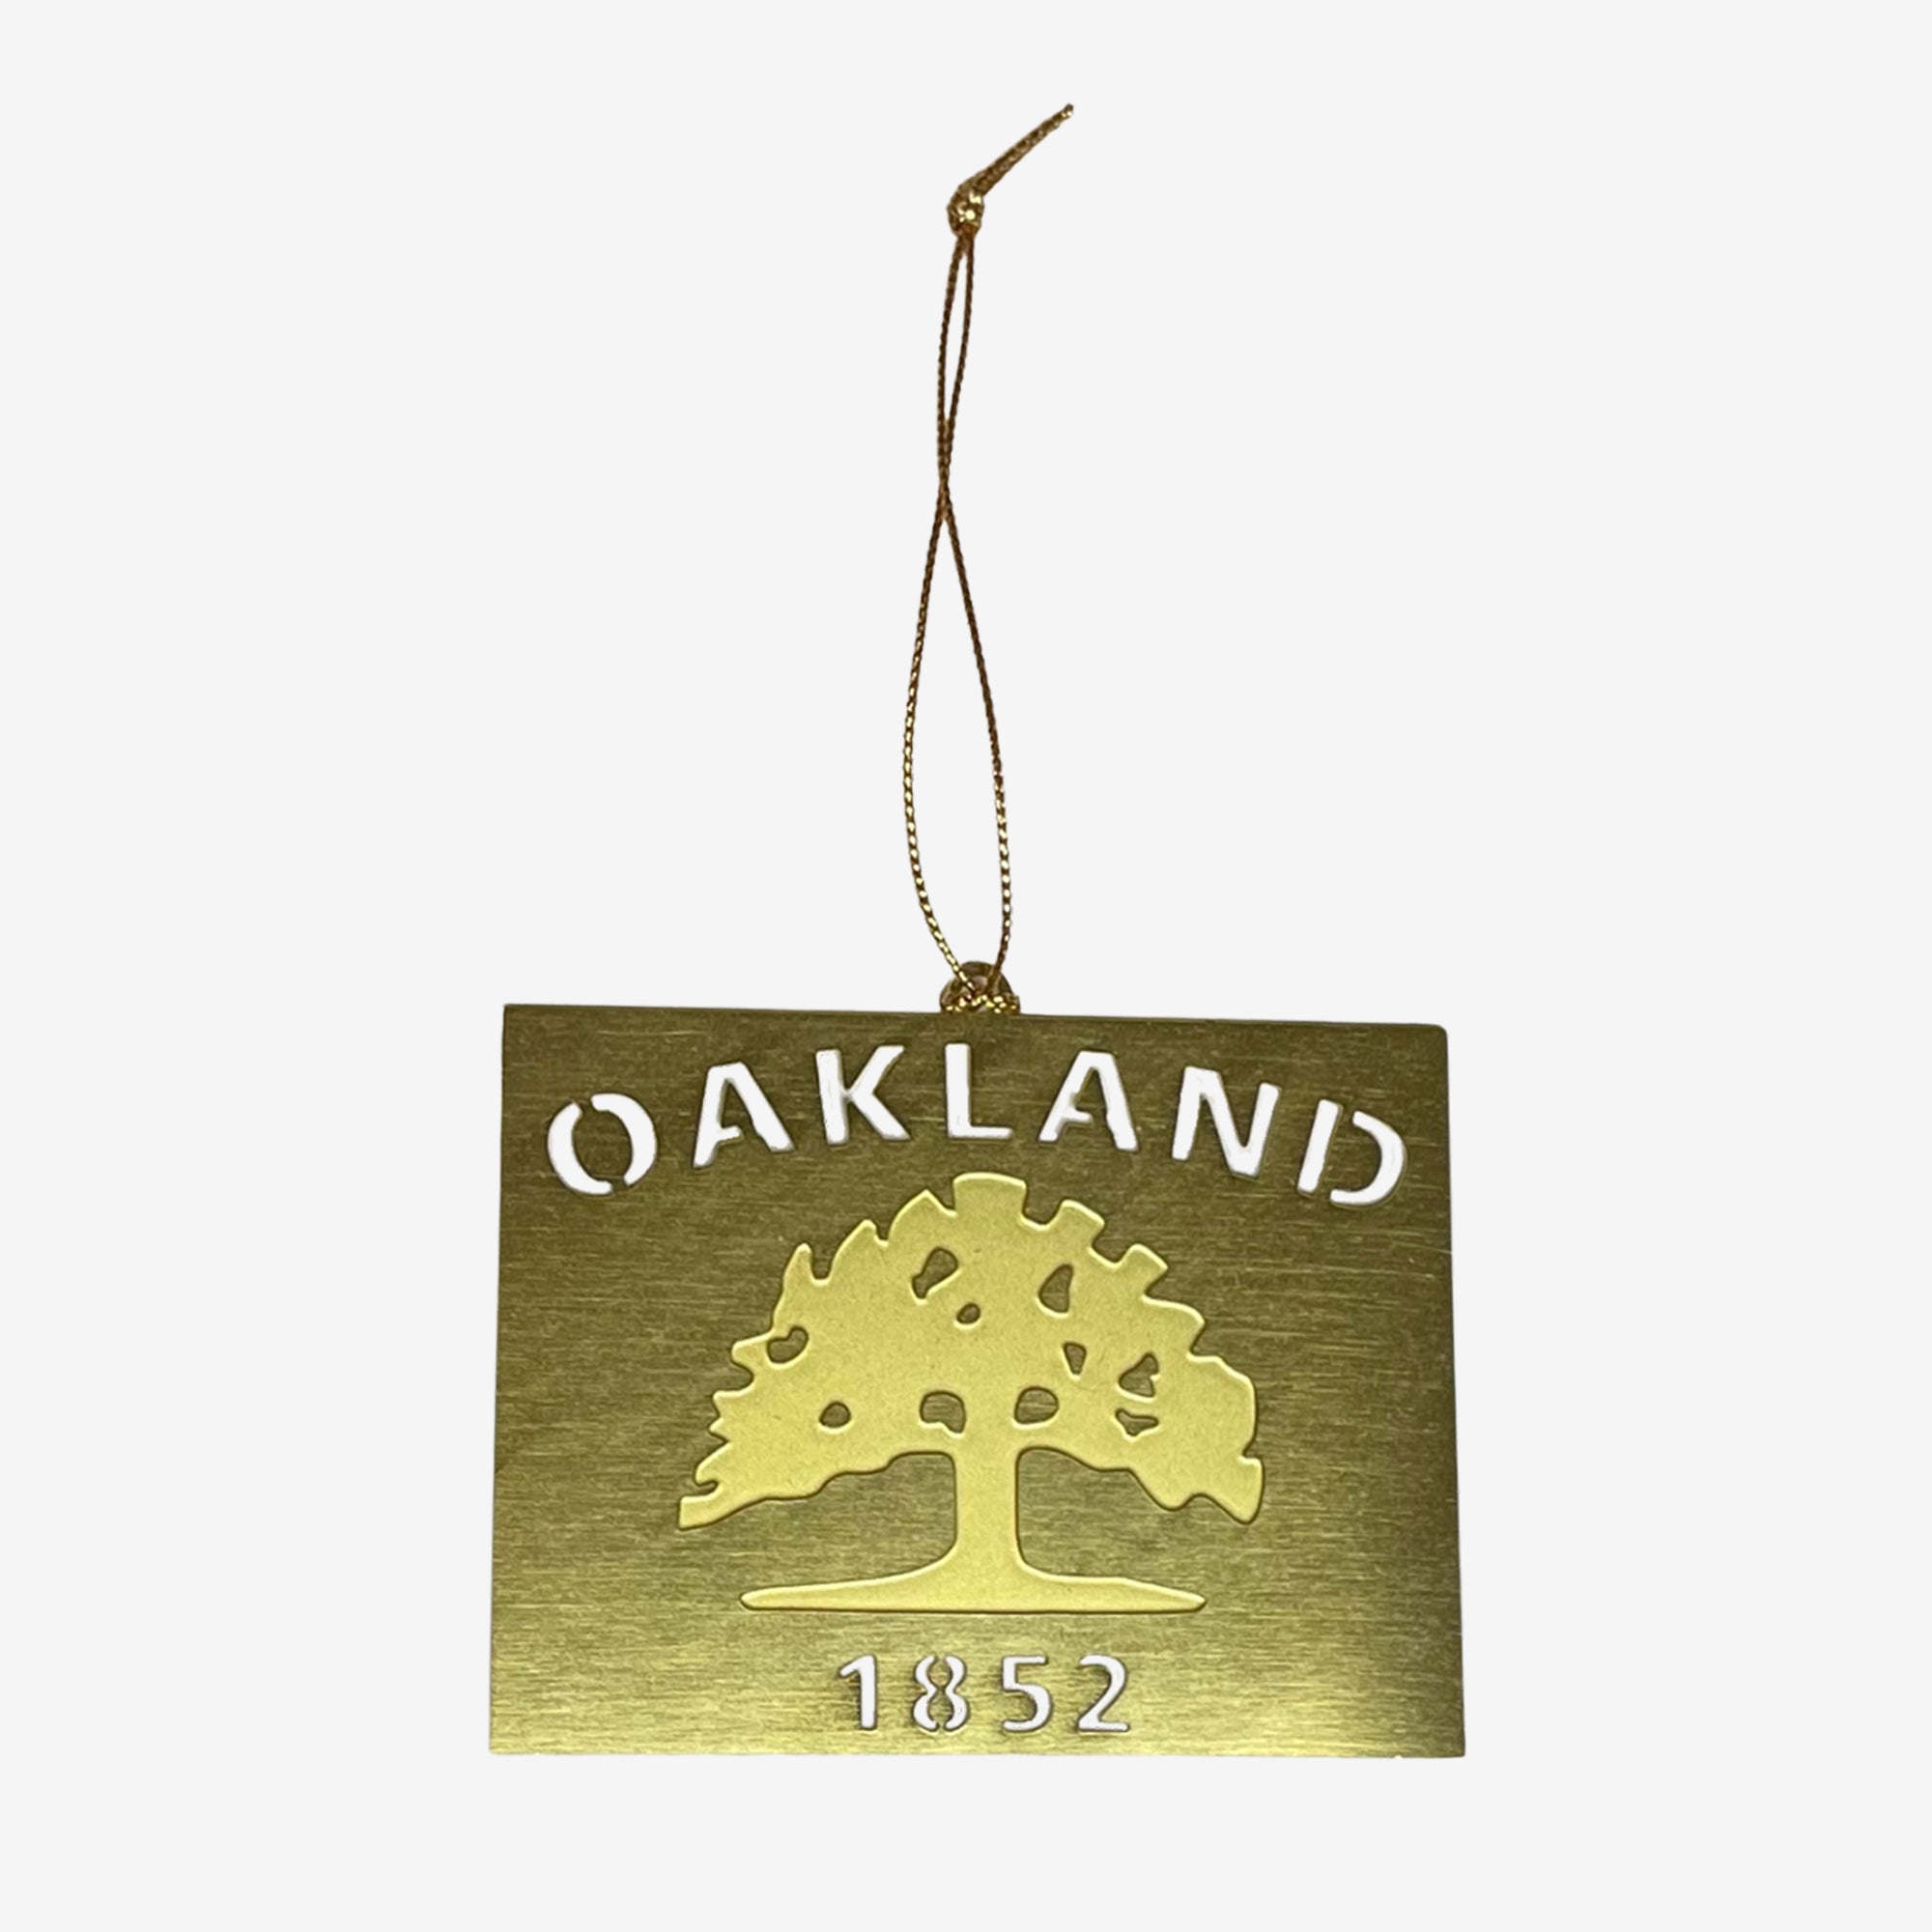 An Oakland flag is depicted in cut-out brass on a string for a holiday tree.